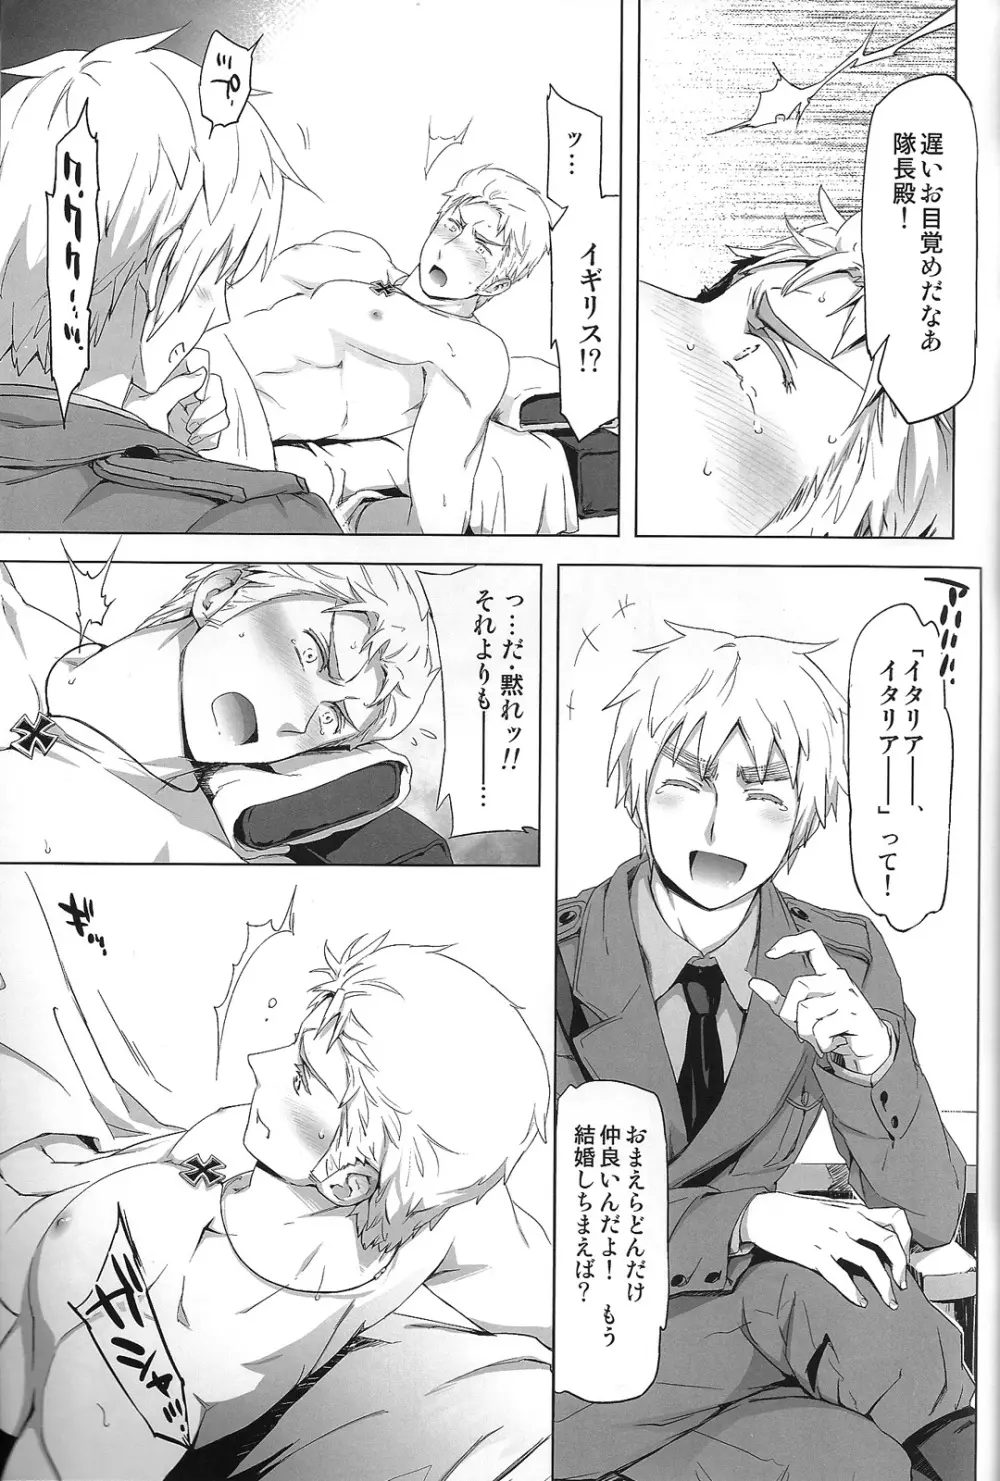 Magia Sexualis 1 Page.20